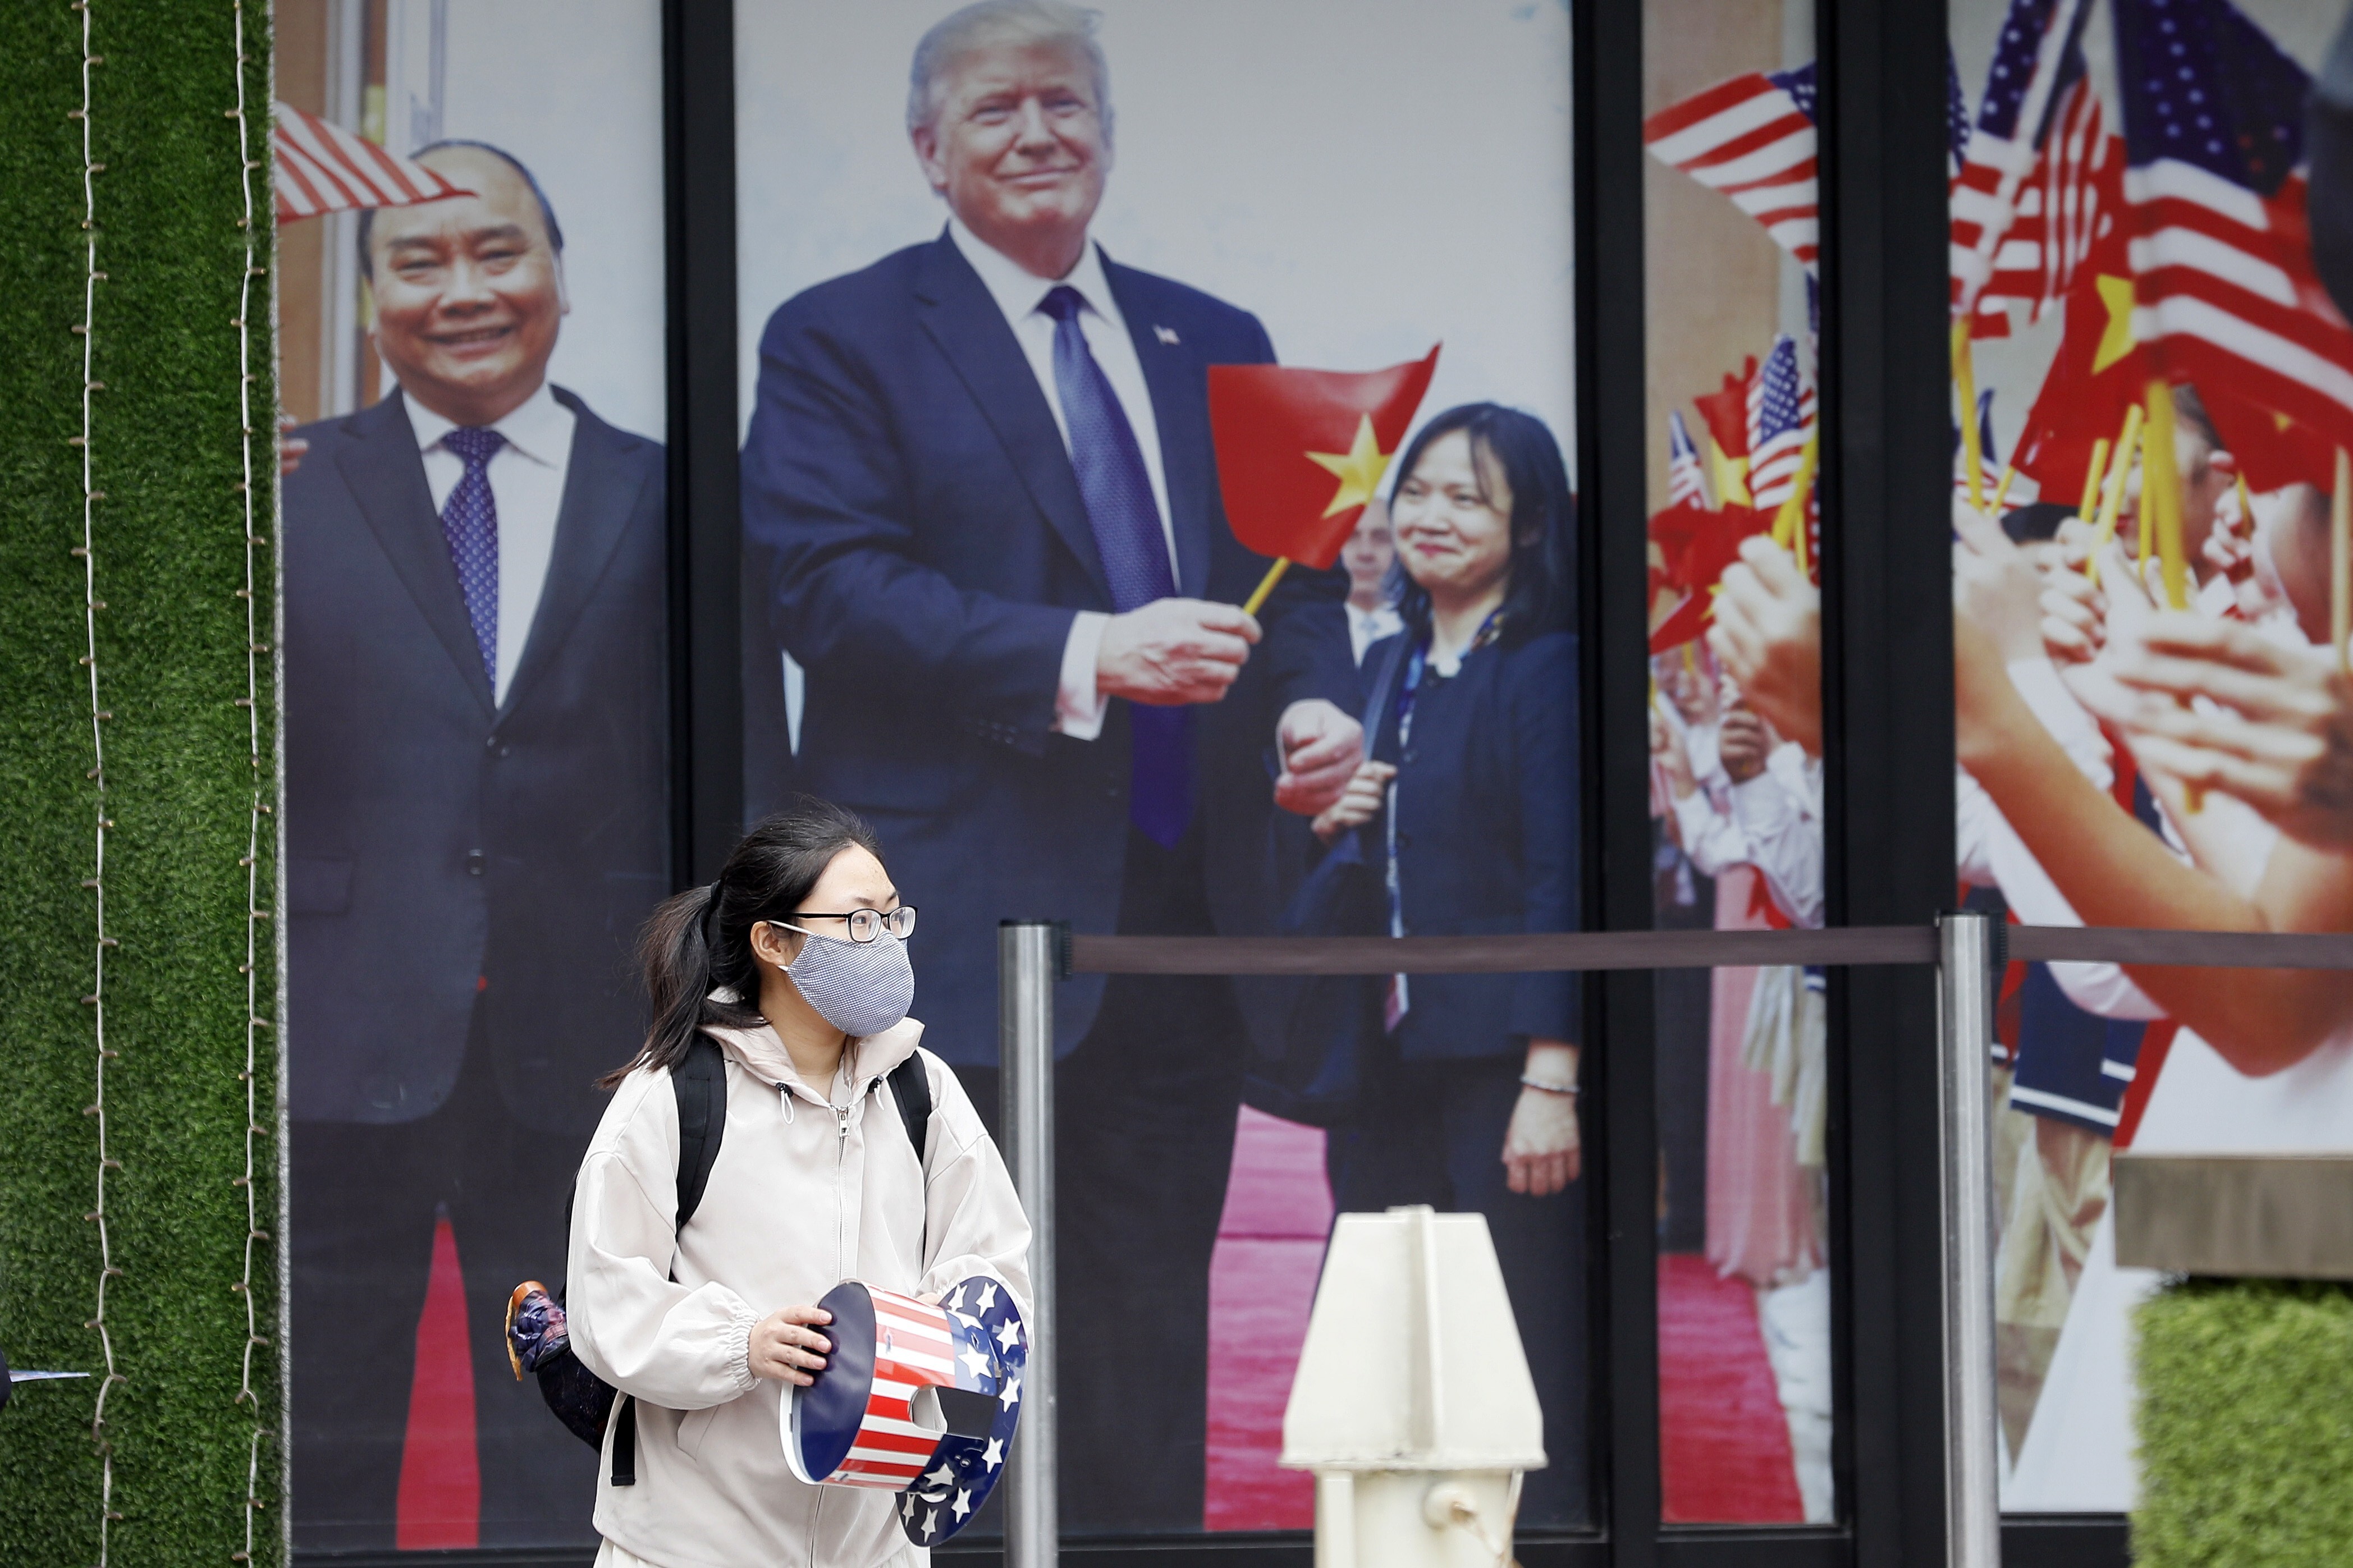 A photo display of Vietnamese Prime Minister Nguyen Xuan Phuc and US President Donald Trump outside a Hanoi hotel. The US-Vietnam relationship could take a turn for the better under a Joe Biden presidency, at least in terms of trade. Photo: EPA-EFE